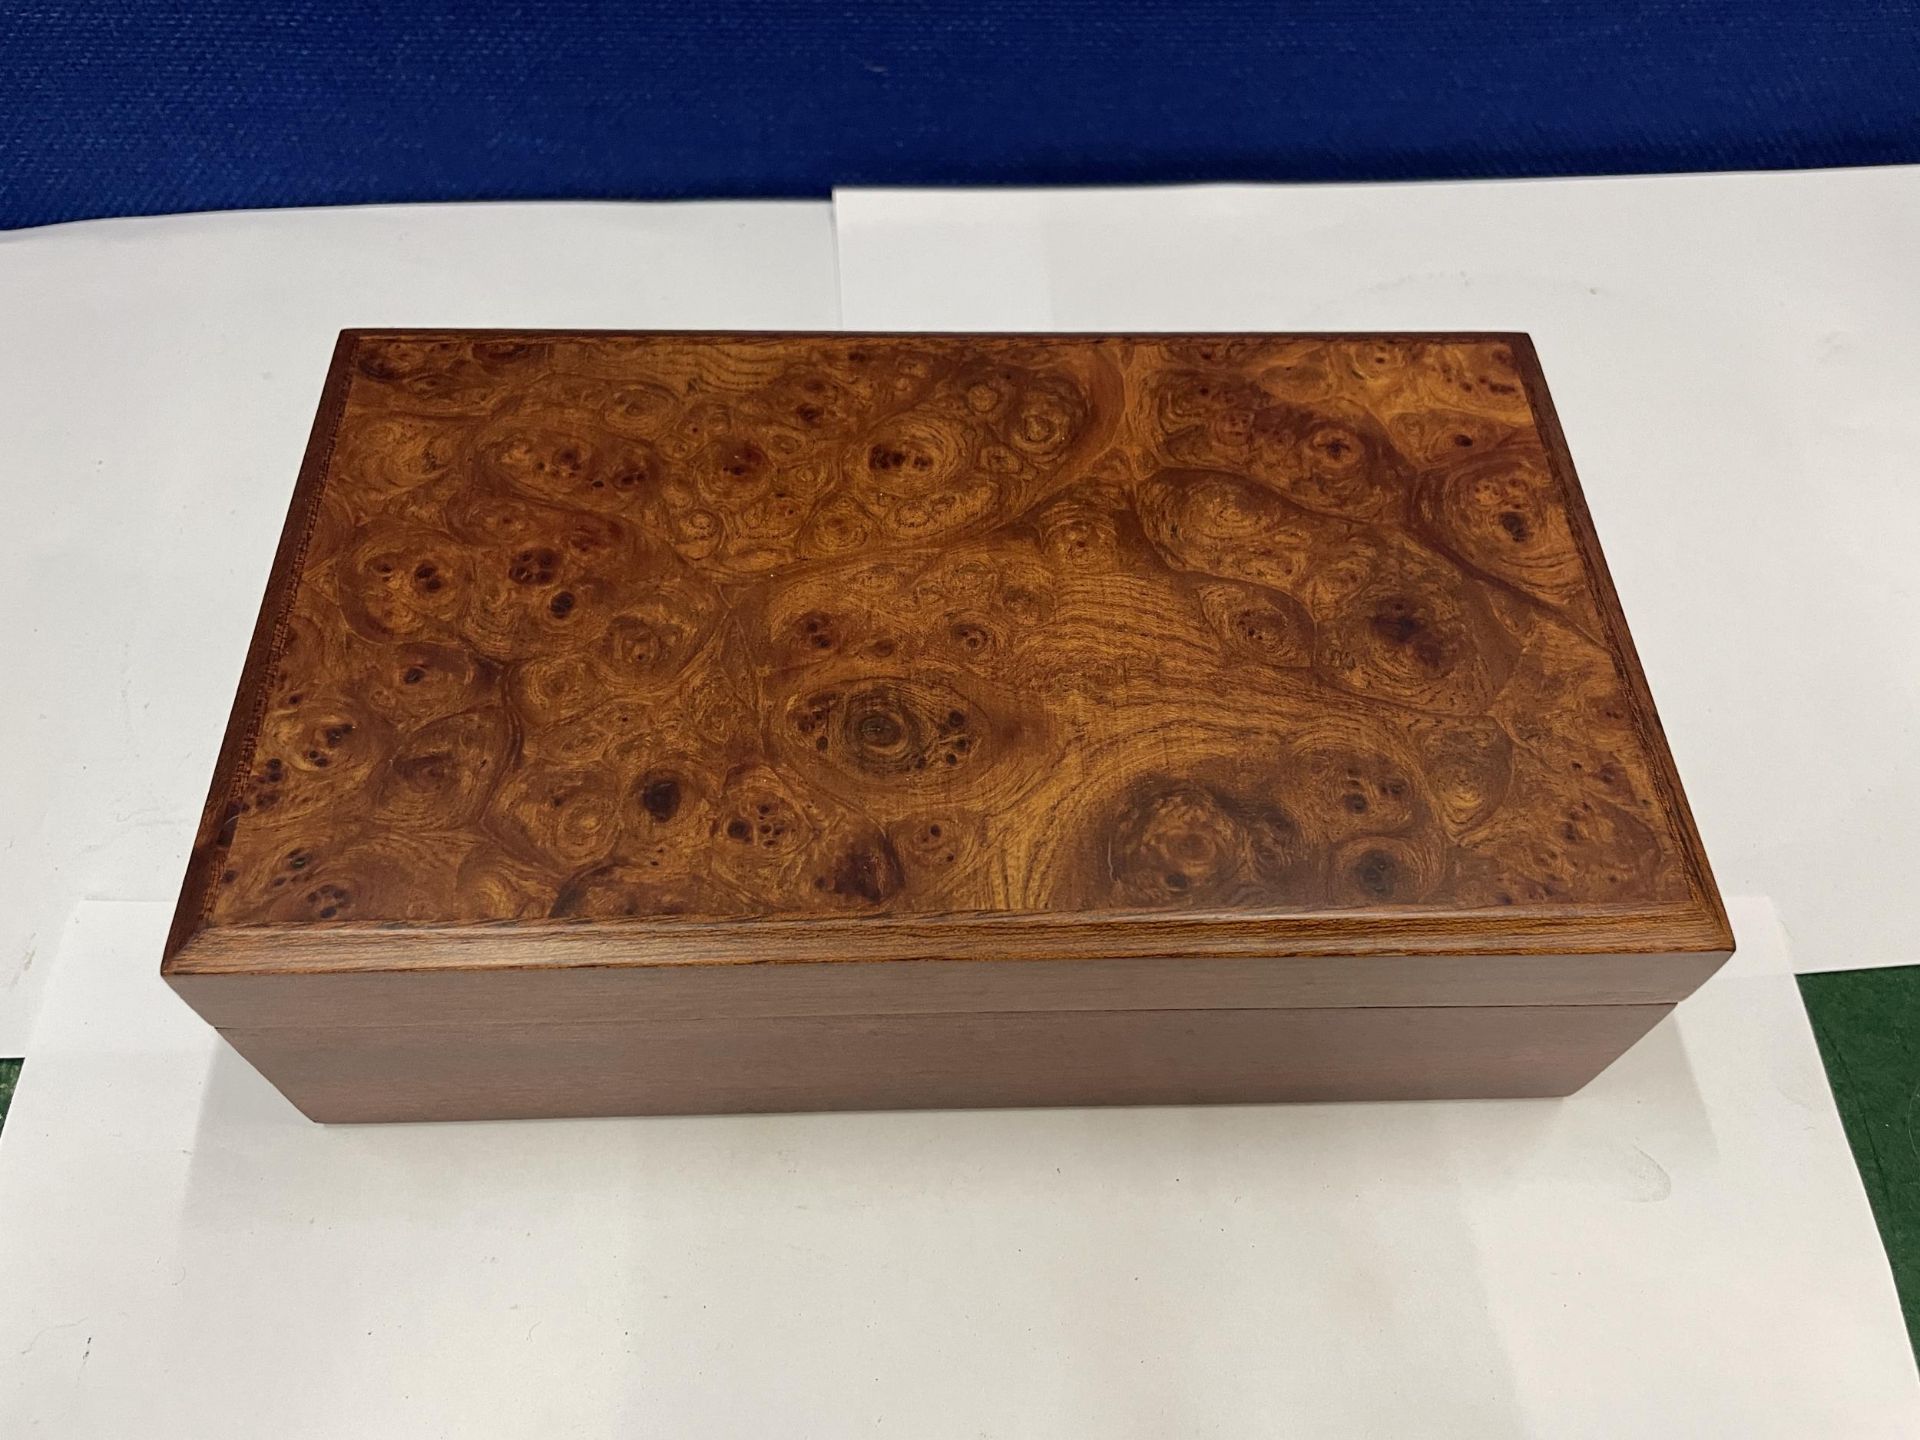 A BOODLE AND DUNTHORNE BRIDGE SET IN A BURR WALNUT BOX - Image 4 of 4